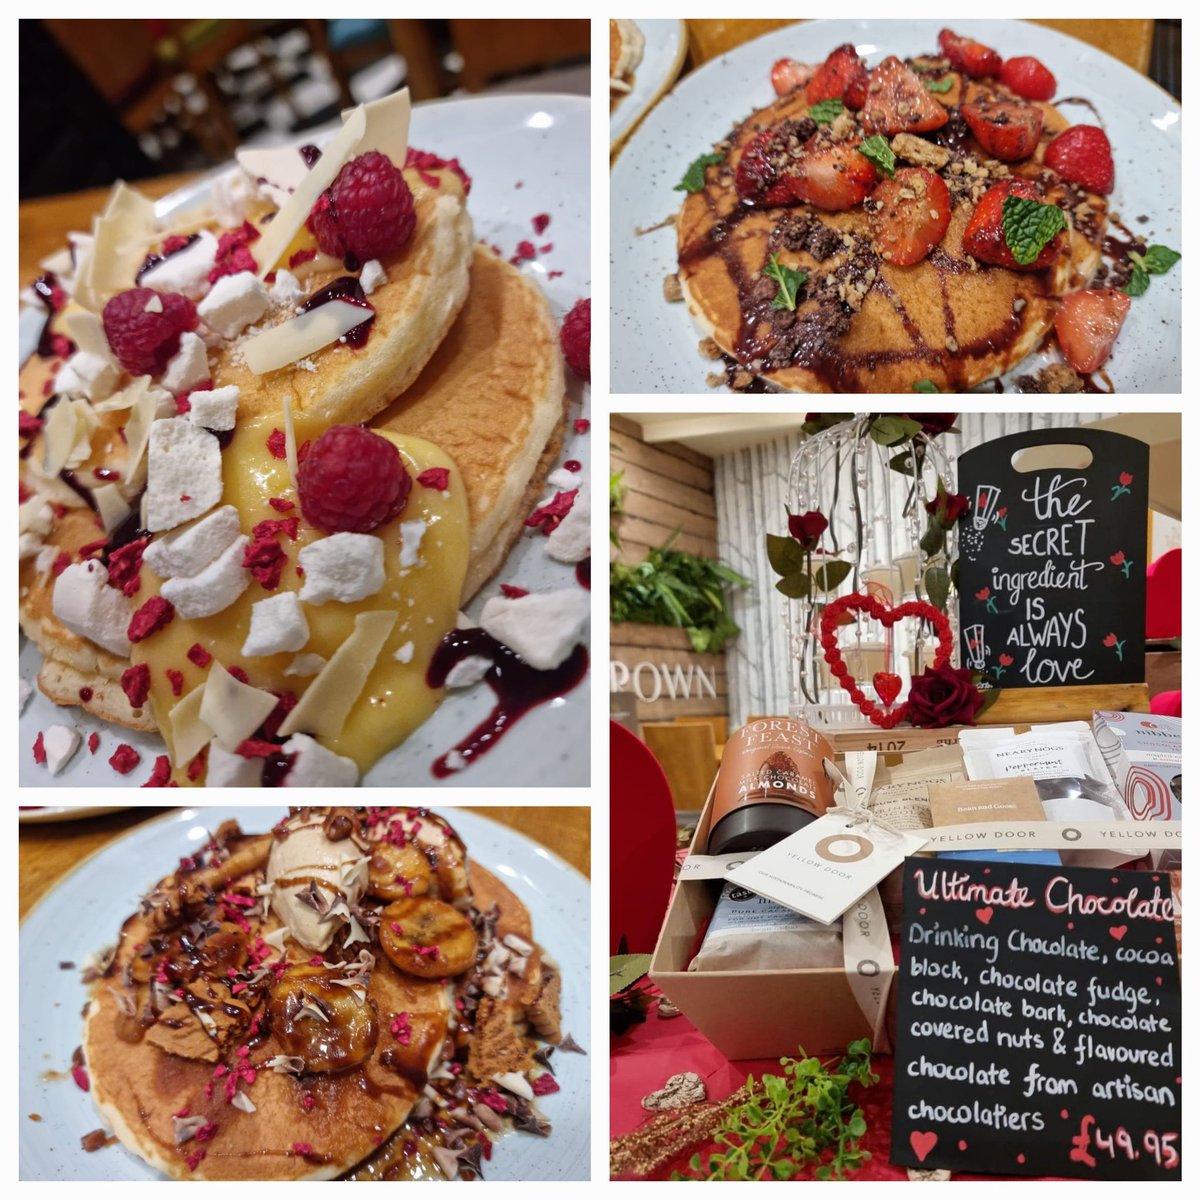 Who's excited for next week?? Pancakes, Valentine's......the secret ingredient is always love ❤️ We've decided to make it pancake week 🥰